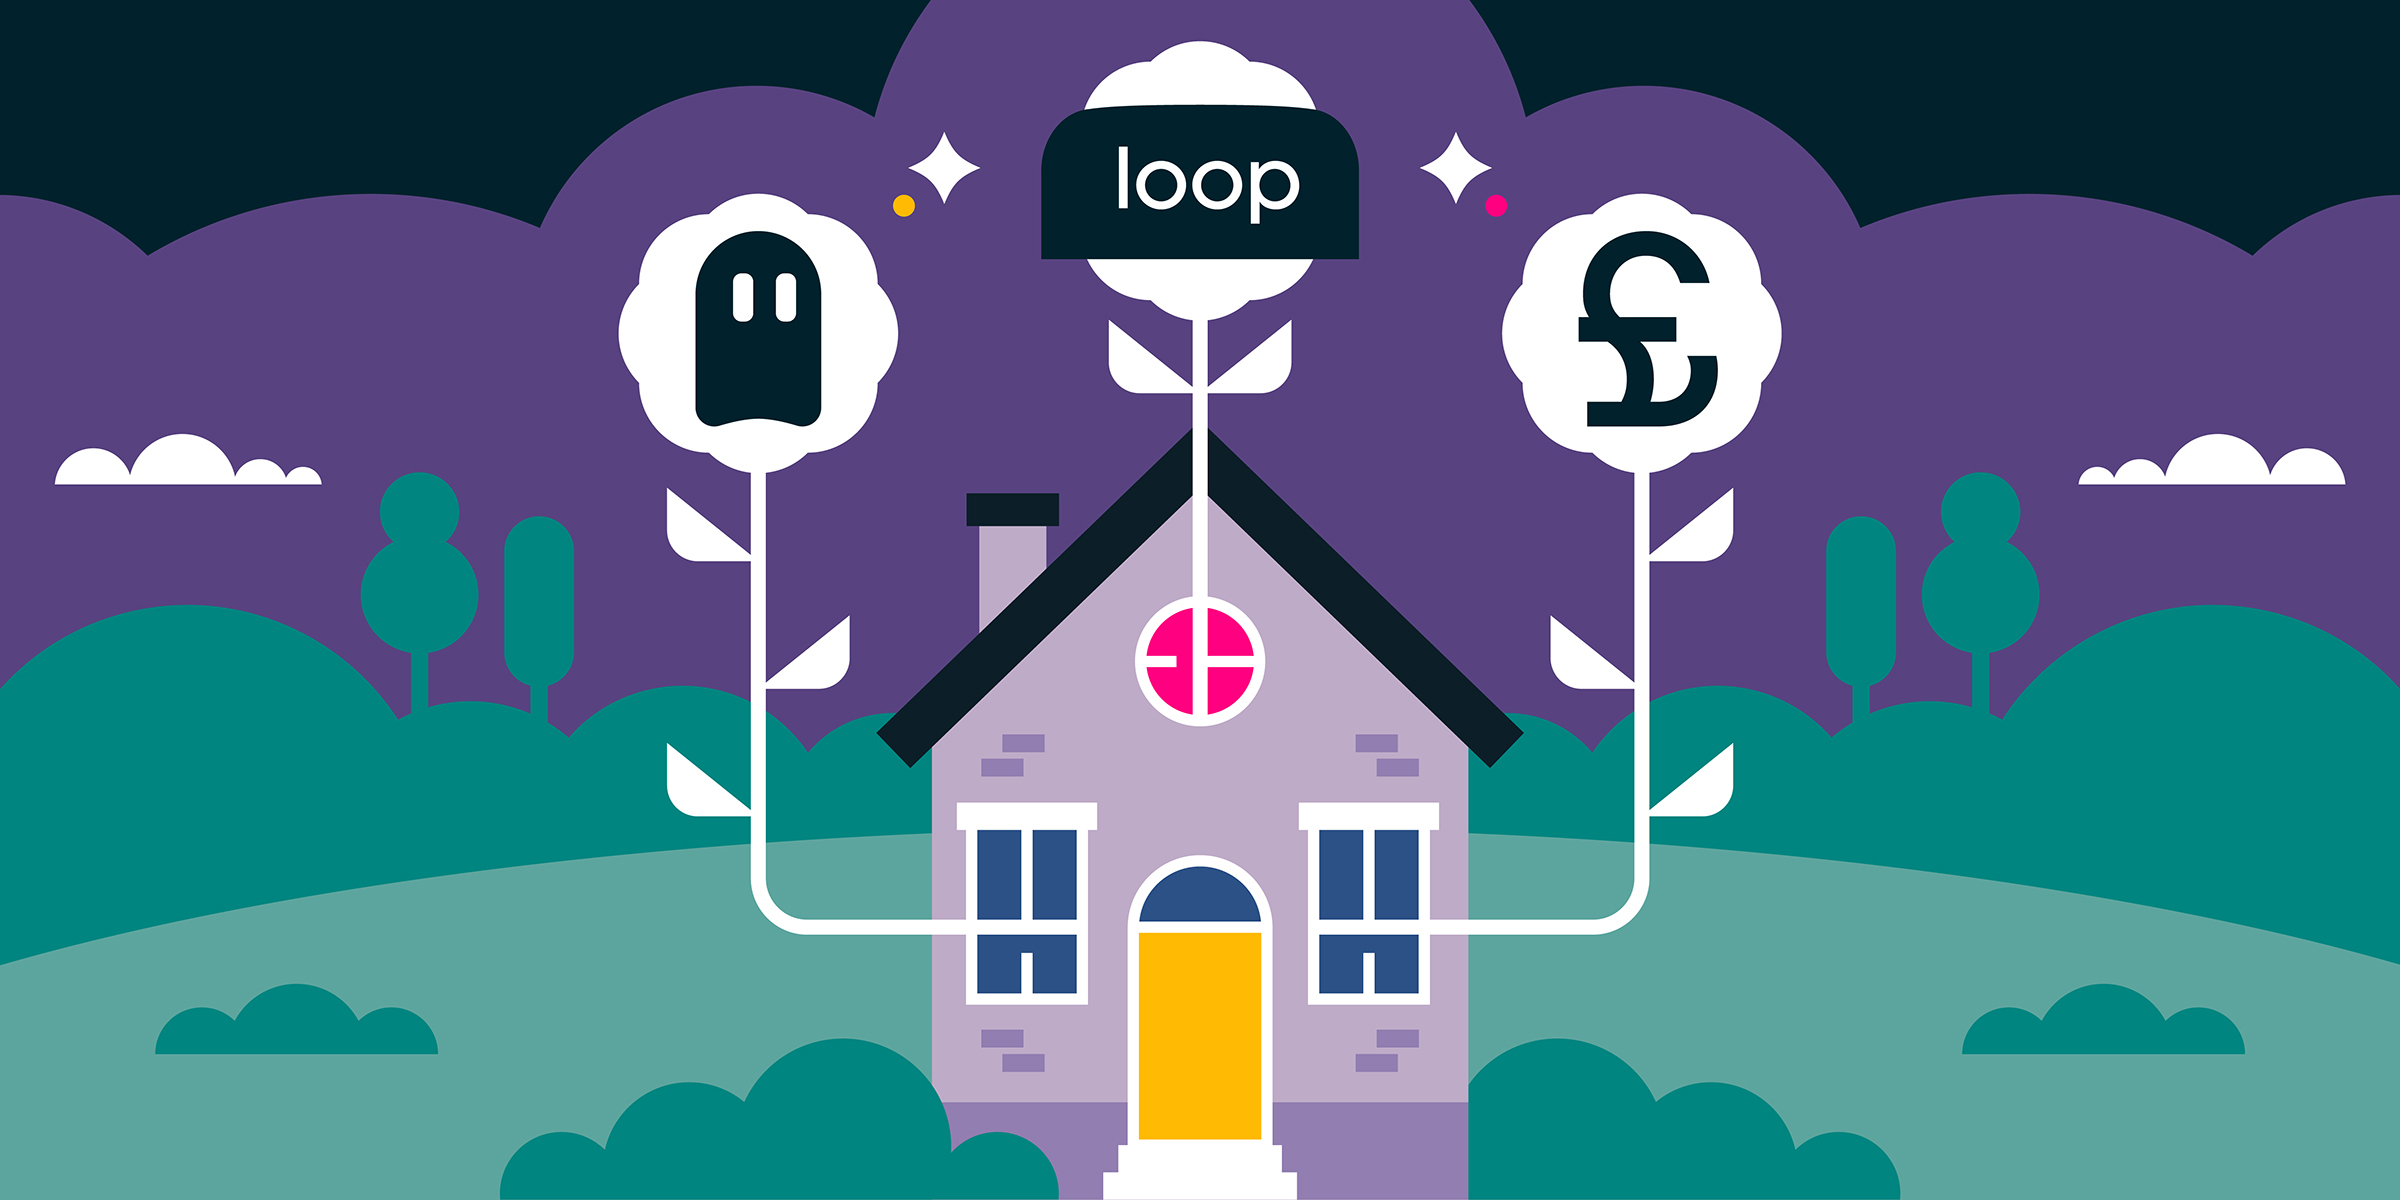 Want to better manage your home energy use? Here's how Loop users have done it